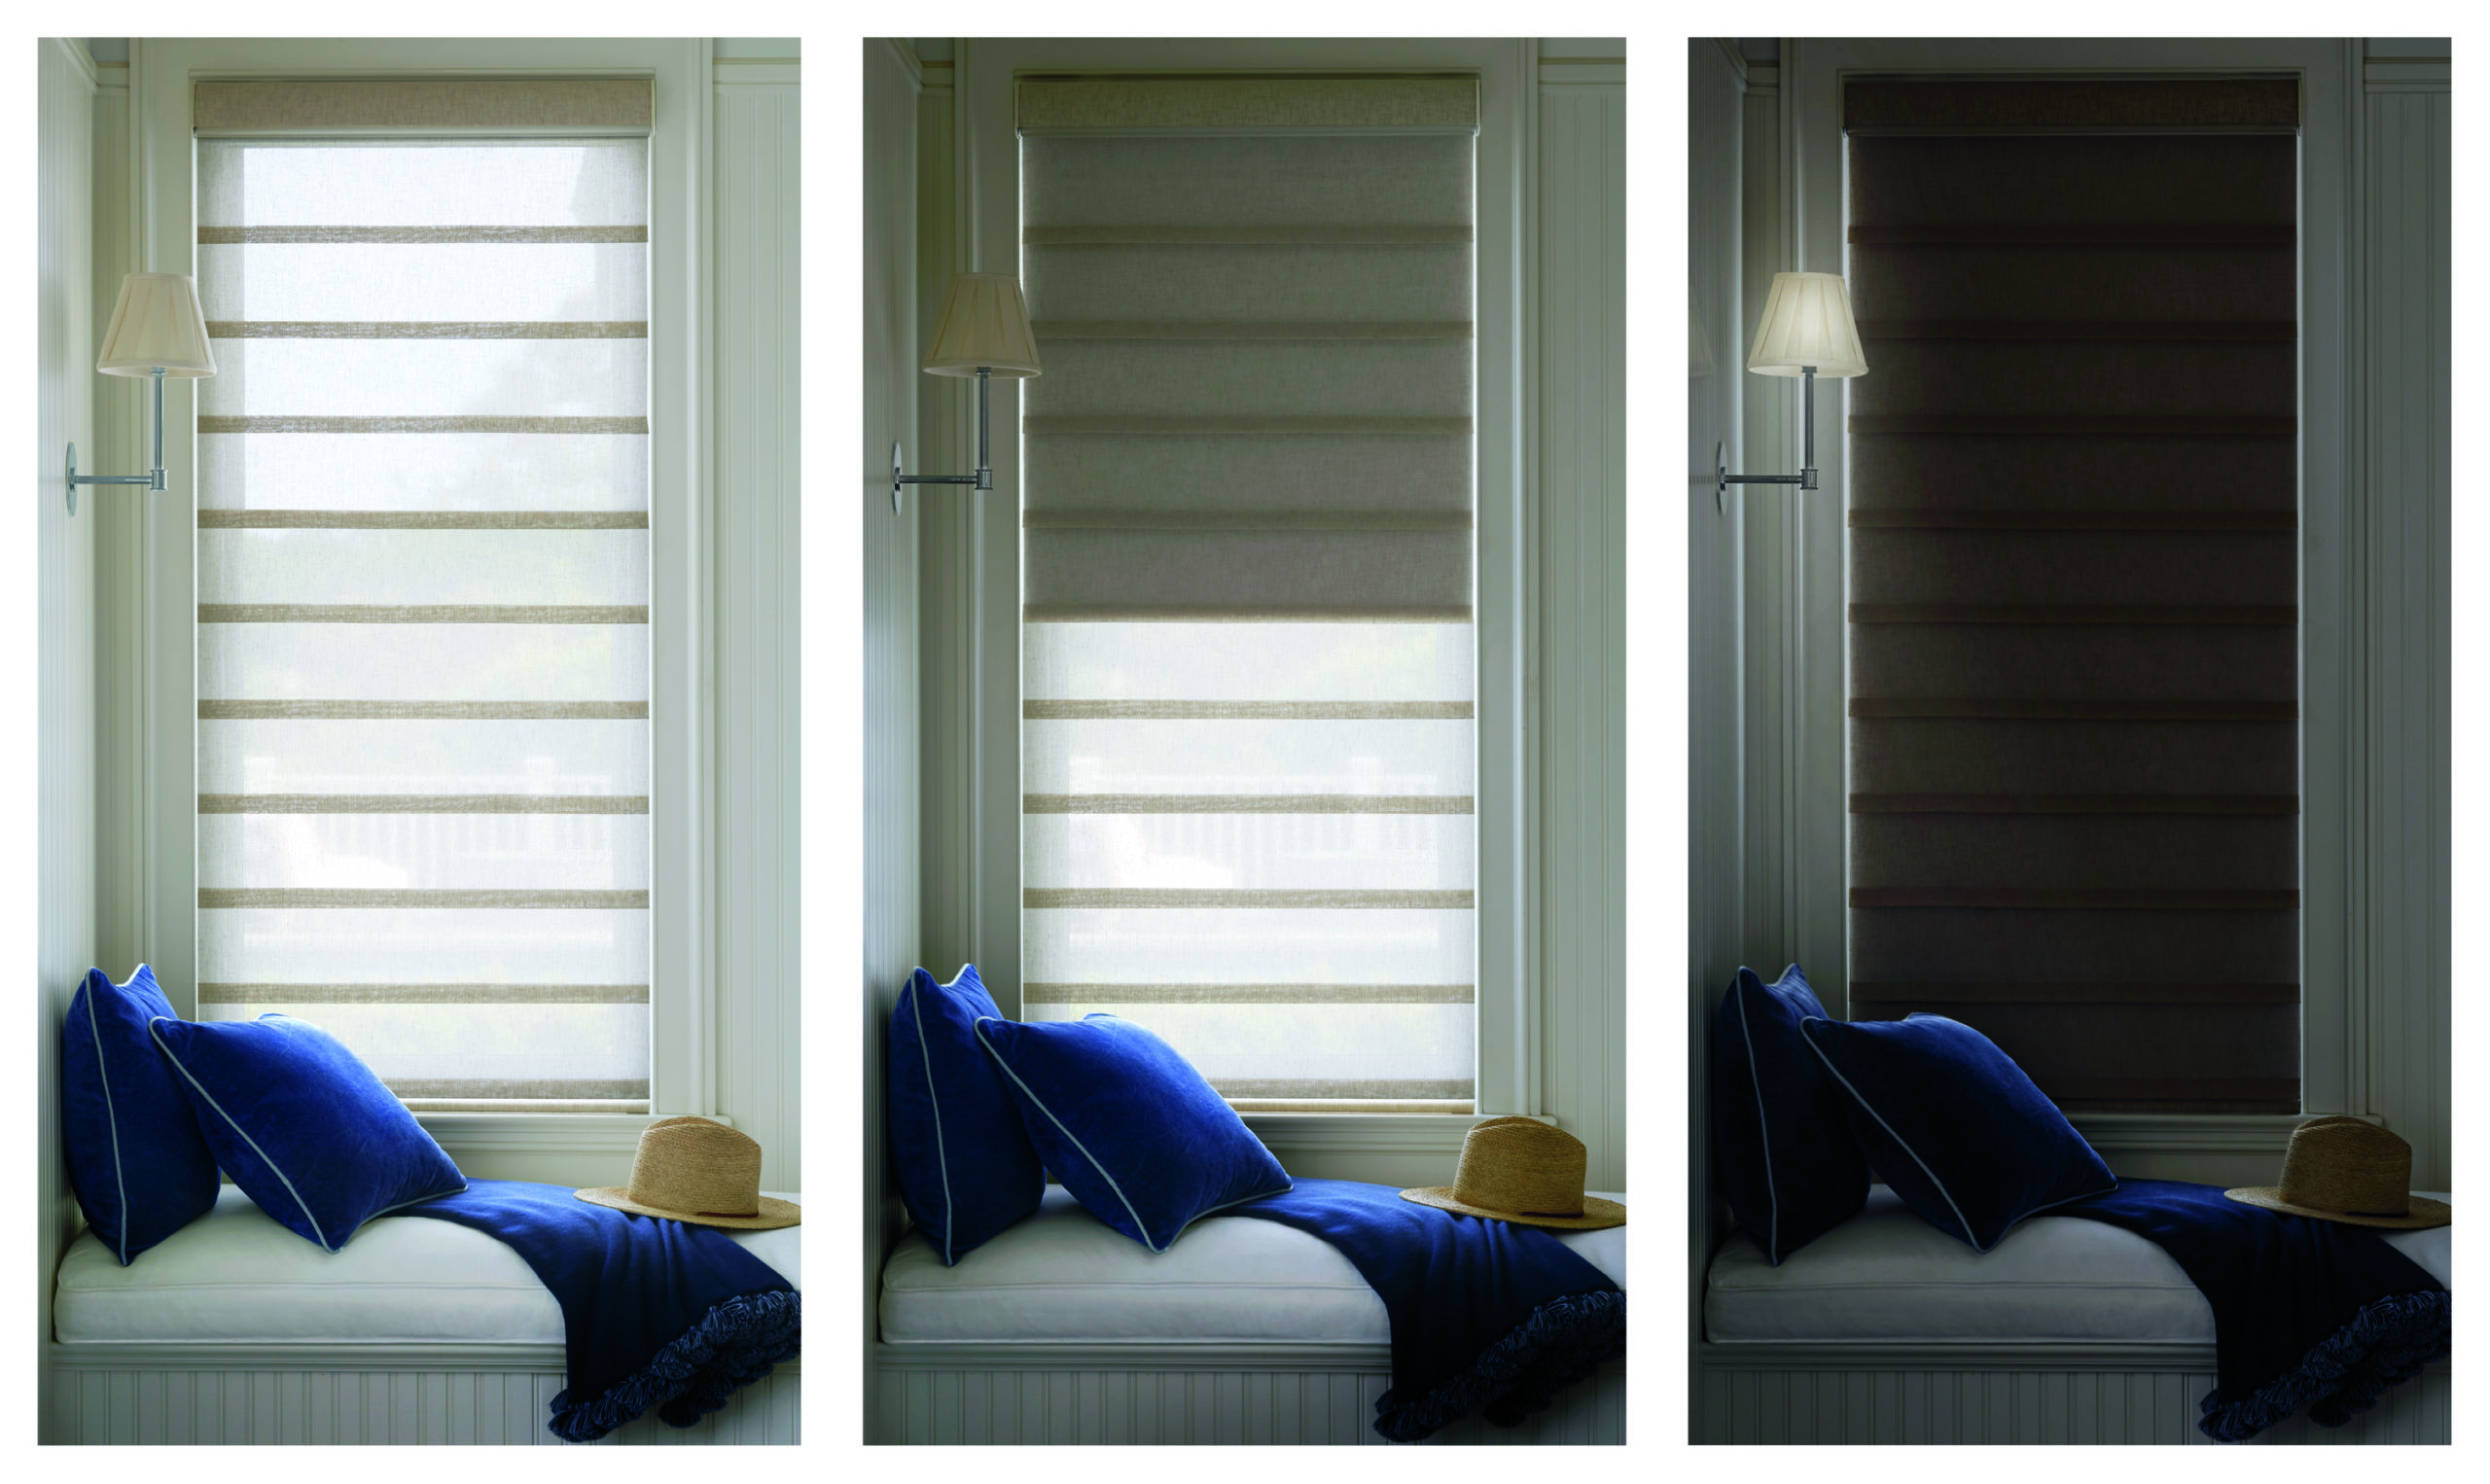 Some blackout window shades that are available to purchase at Drapery Street